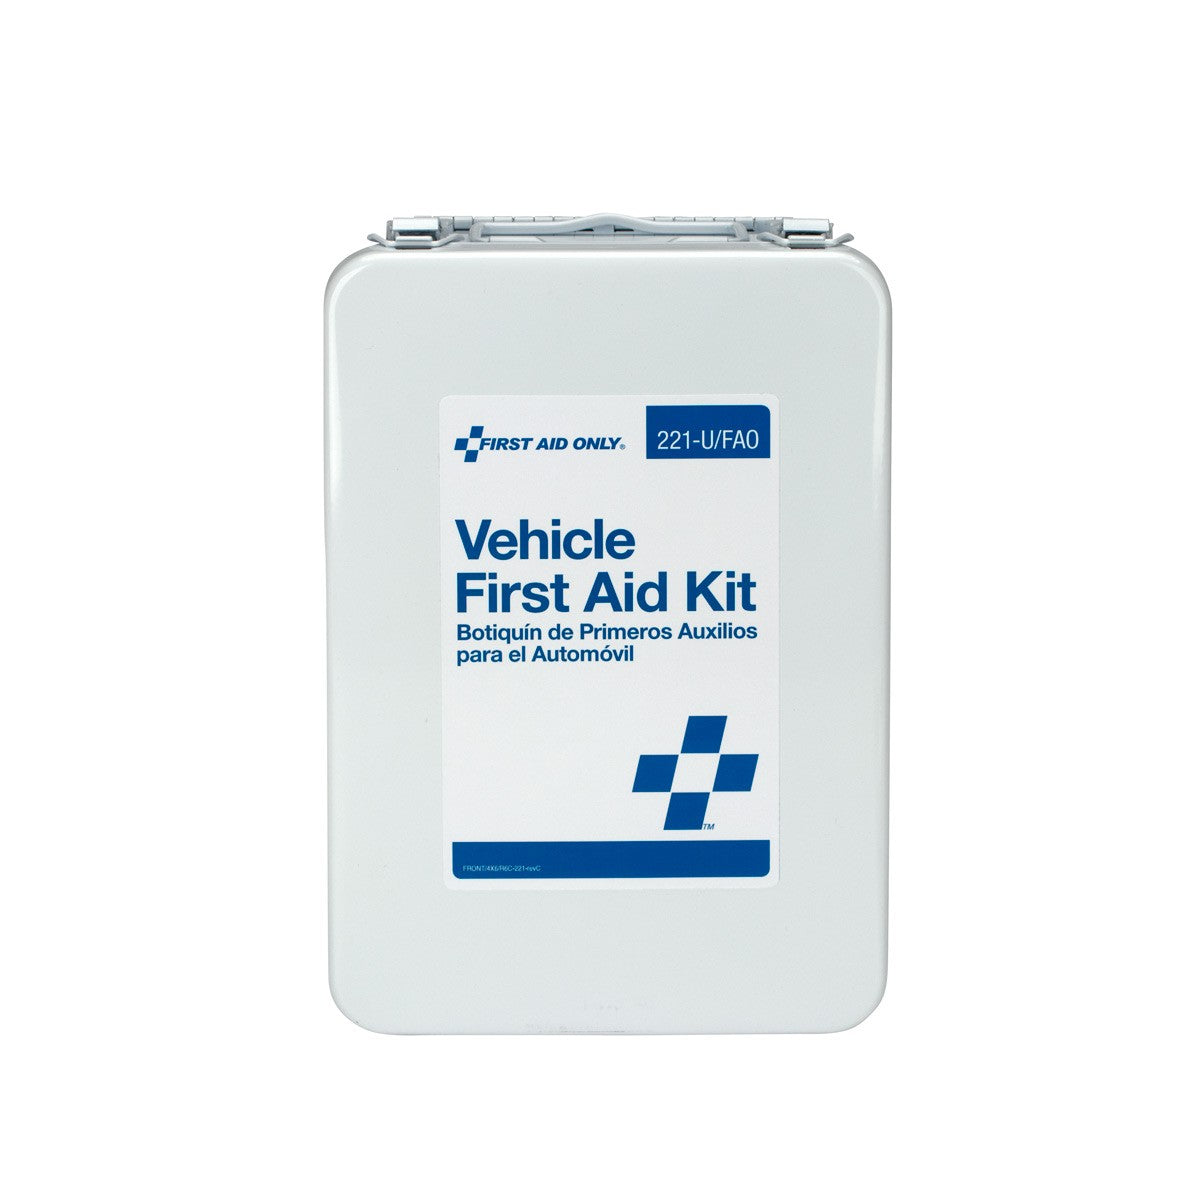 25 Person Vehicle First Aid Kit, Metal Case - W-221-U/FAO